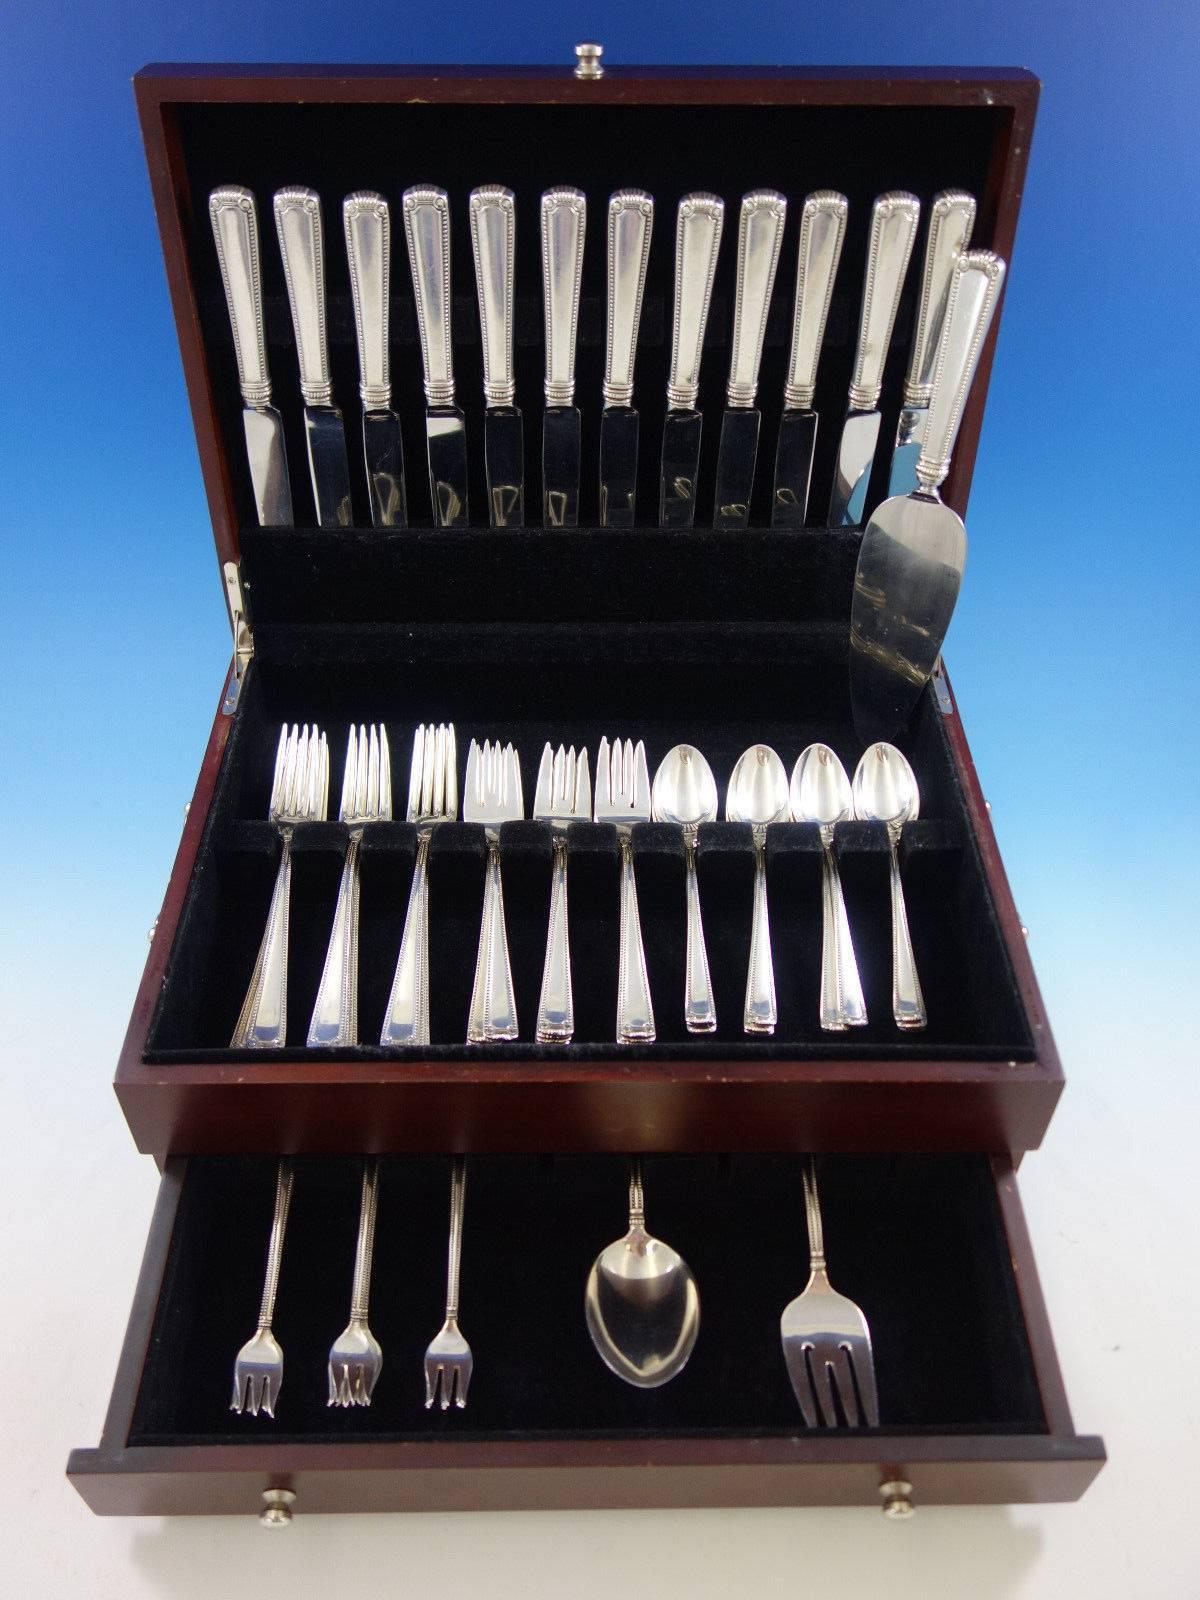 Scroll and Bead by Blackinton Sterling Silver Flatware set with beaded design - 61 pieces. This set includes: 

12 Knives, 9